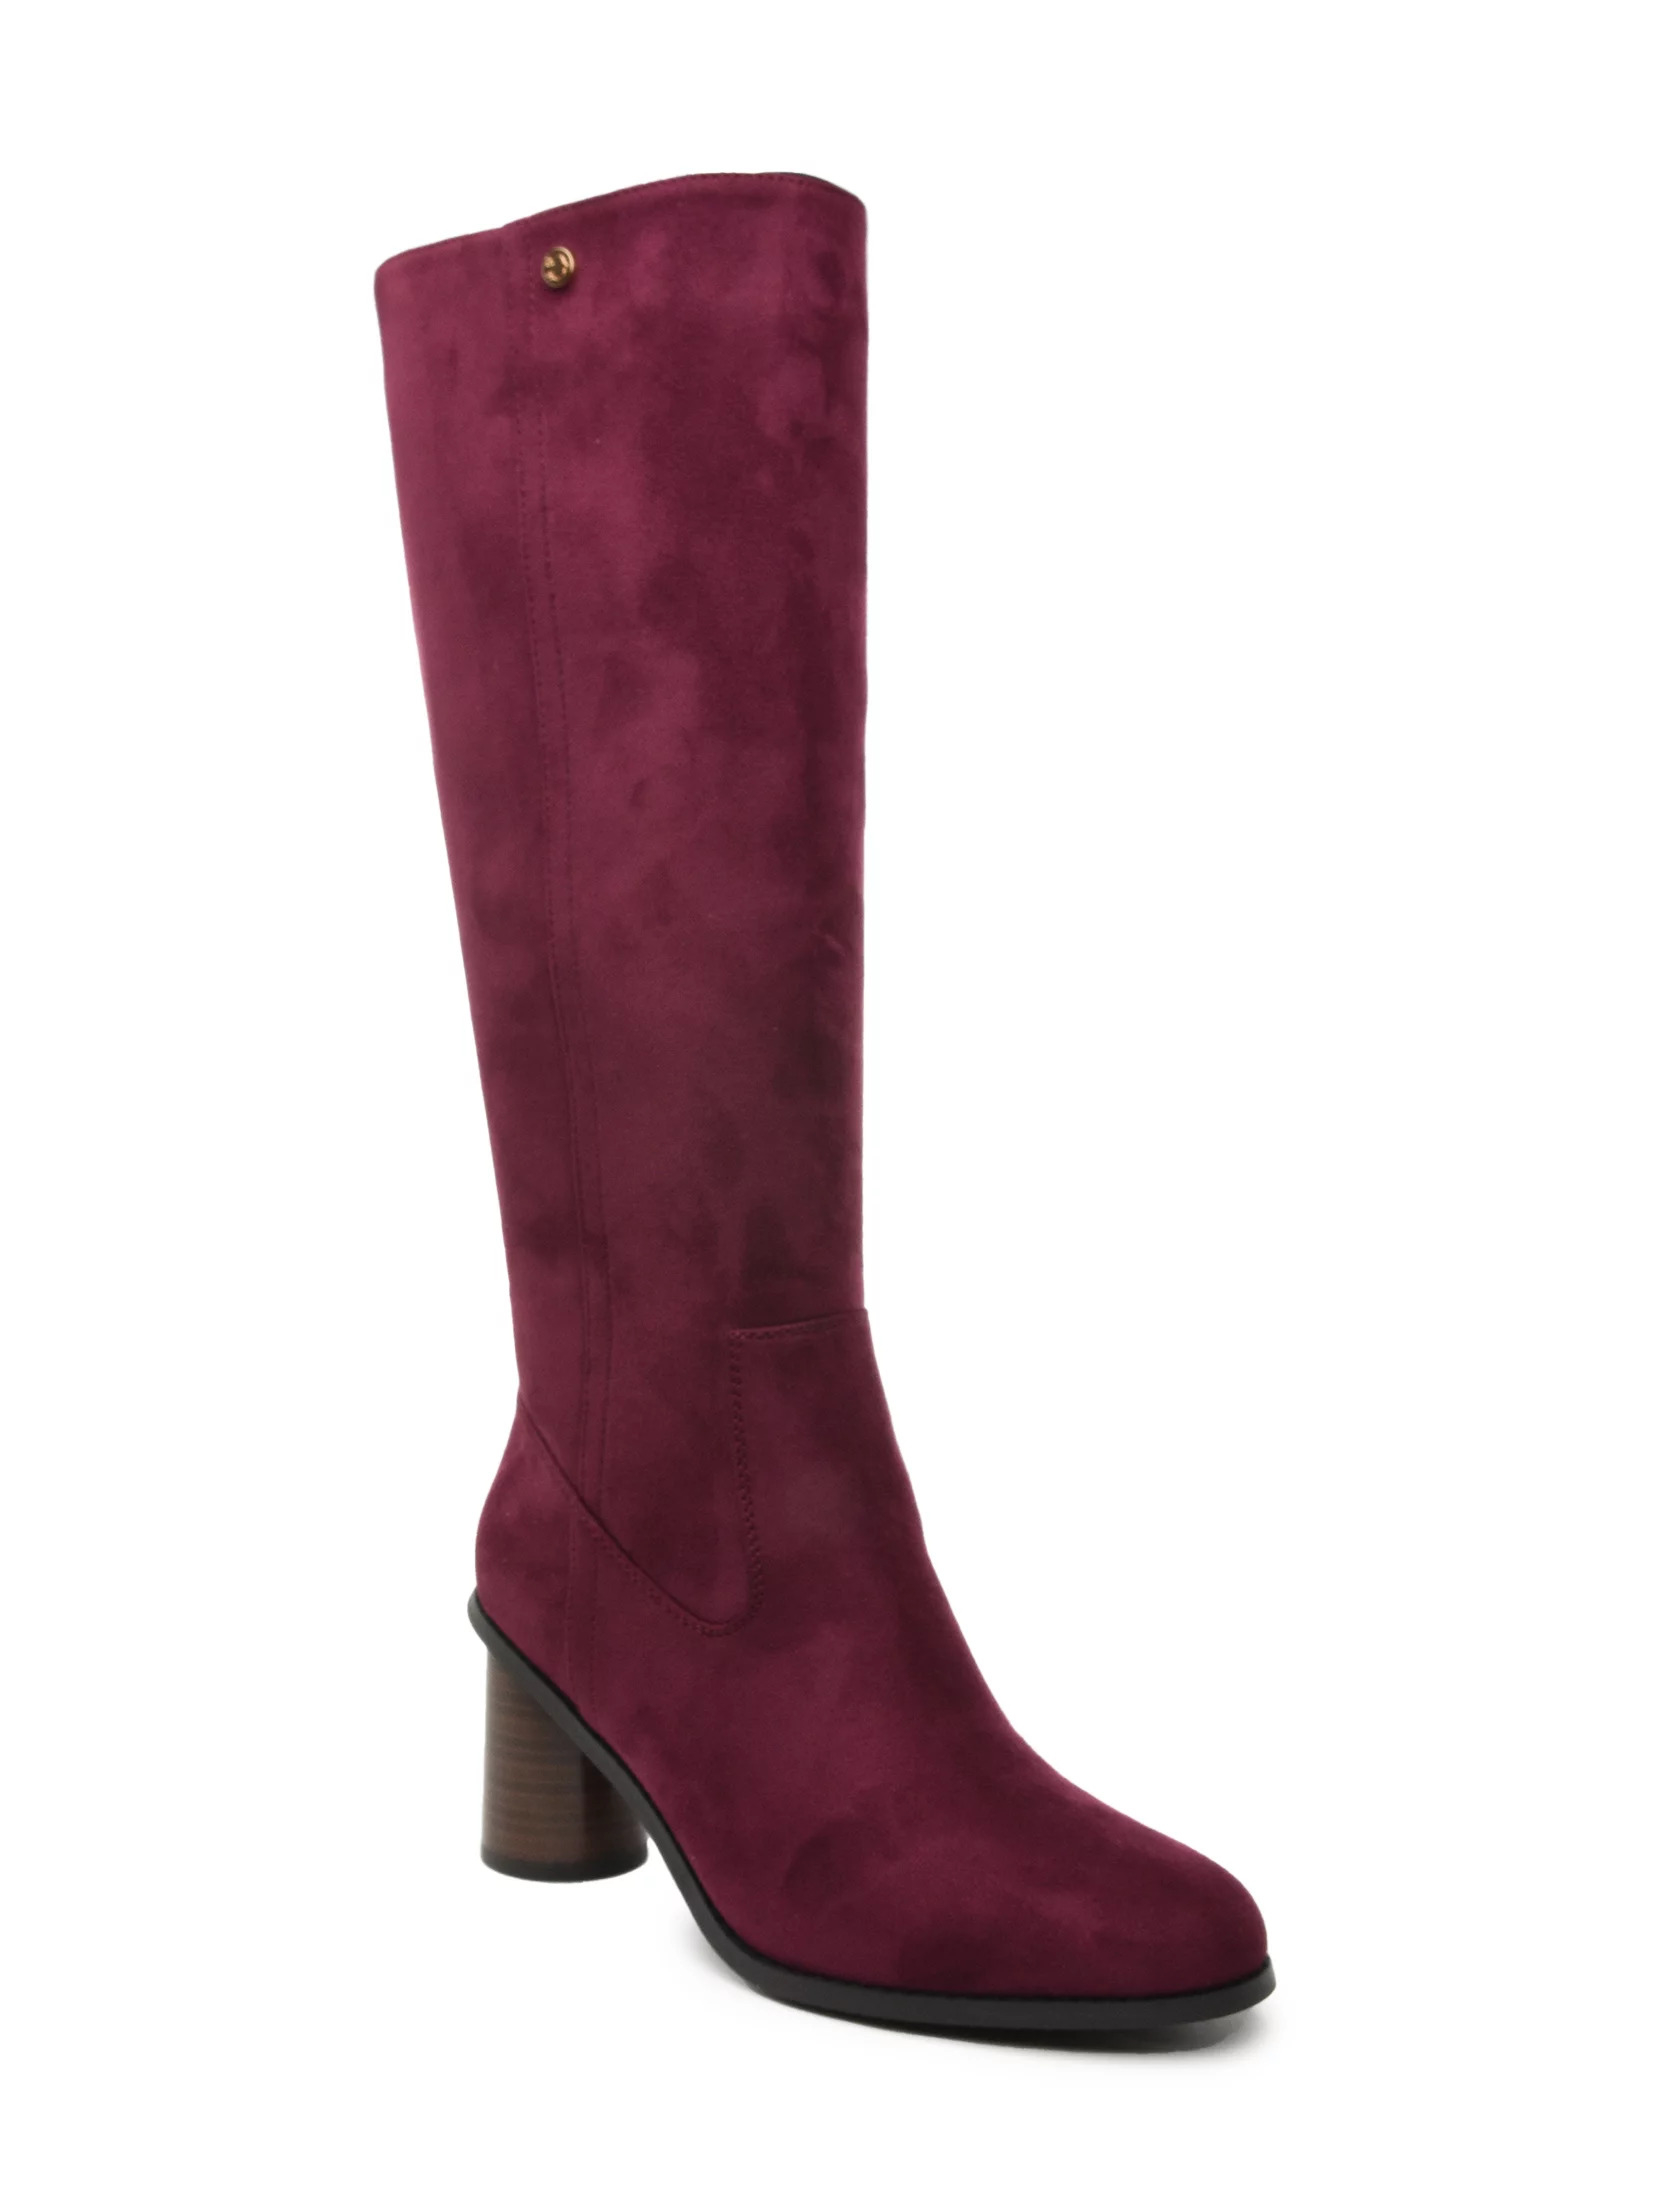 The burgundy boot